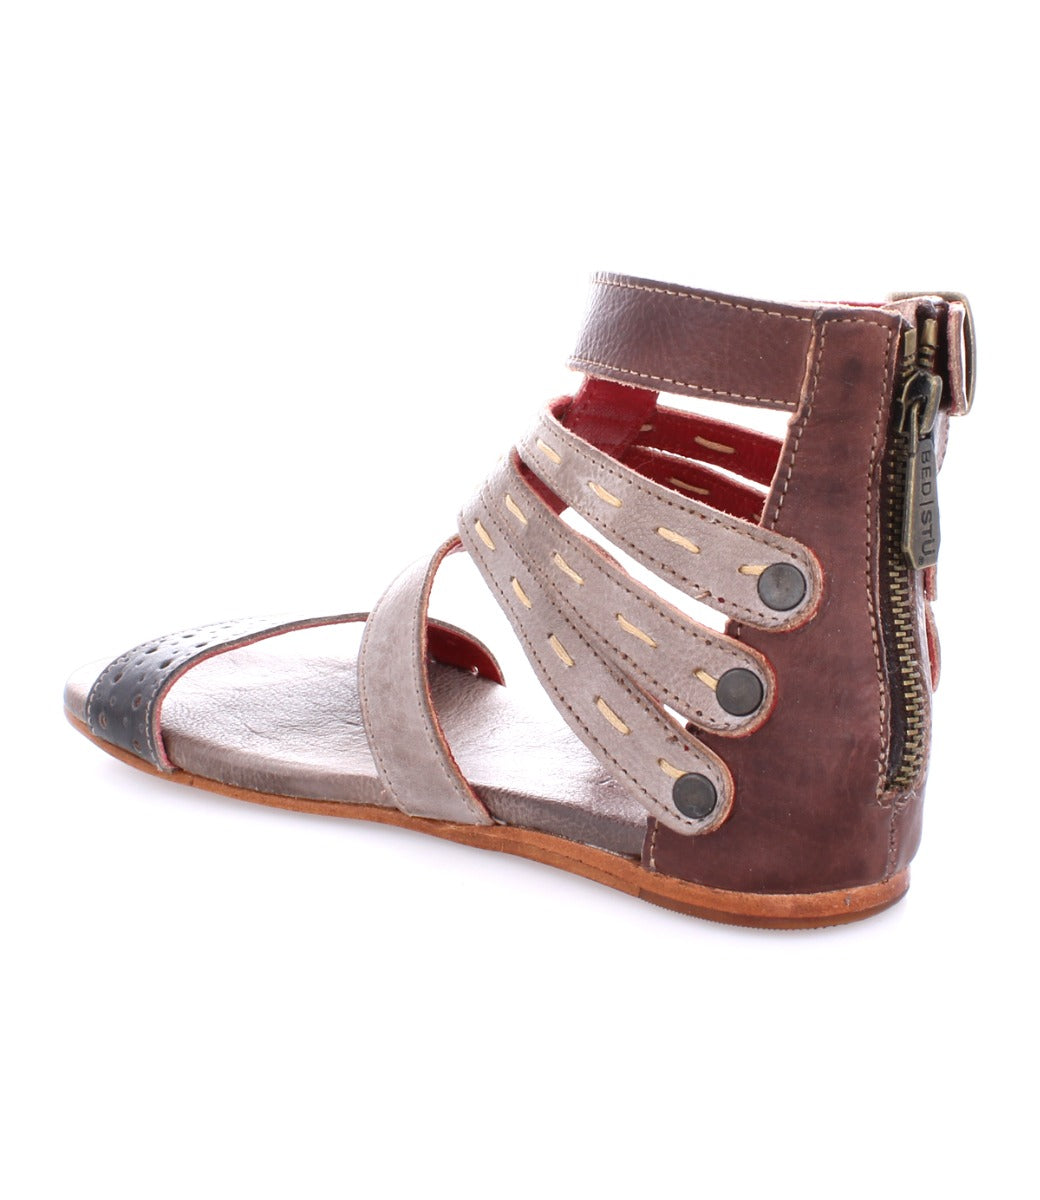 A pair of Artemis women's sandals with straps and buckles by Bed Stu.